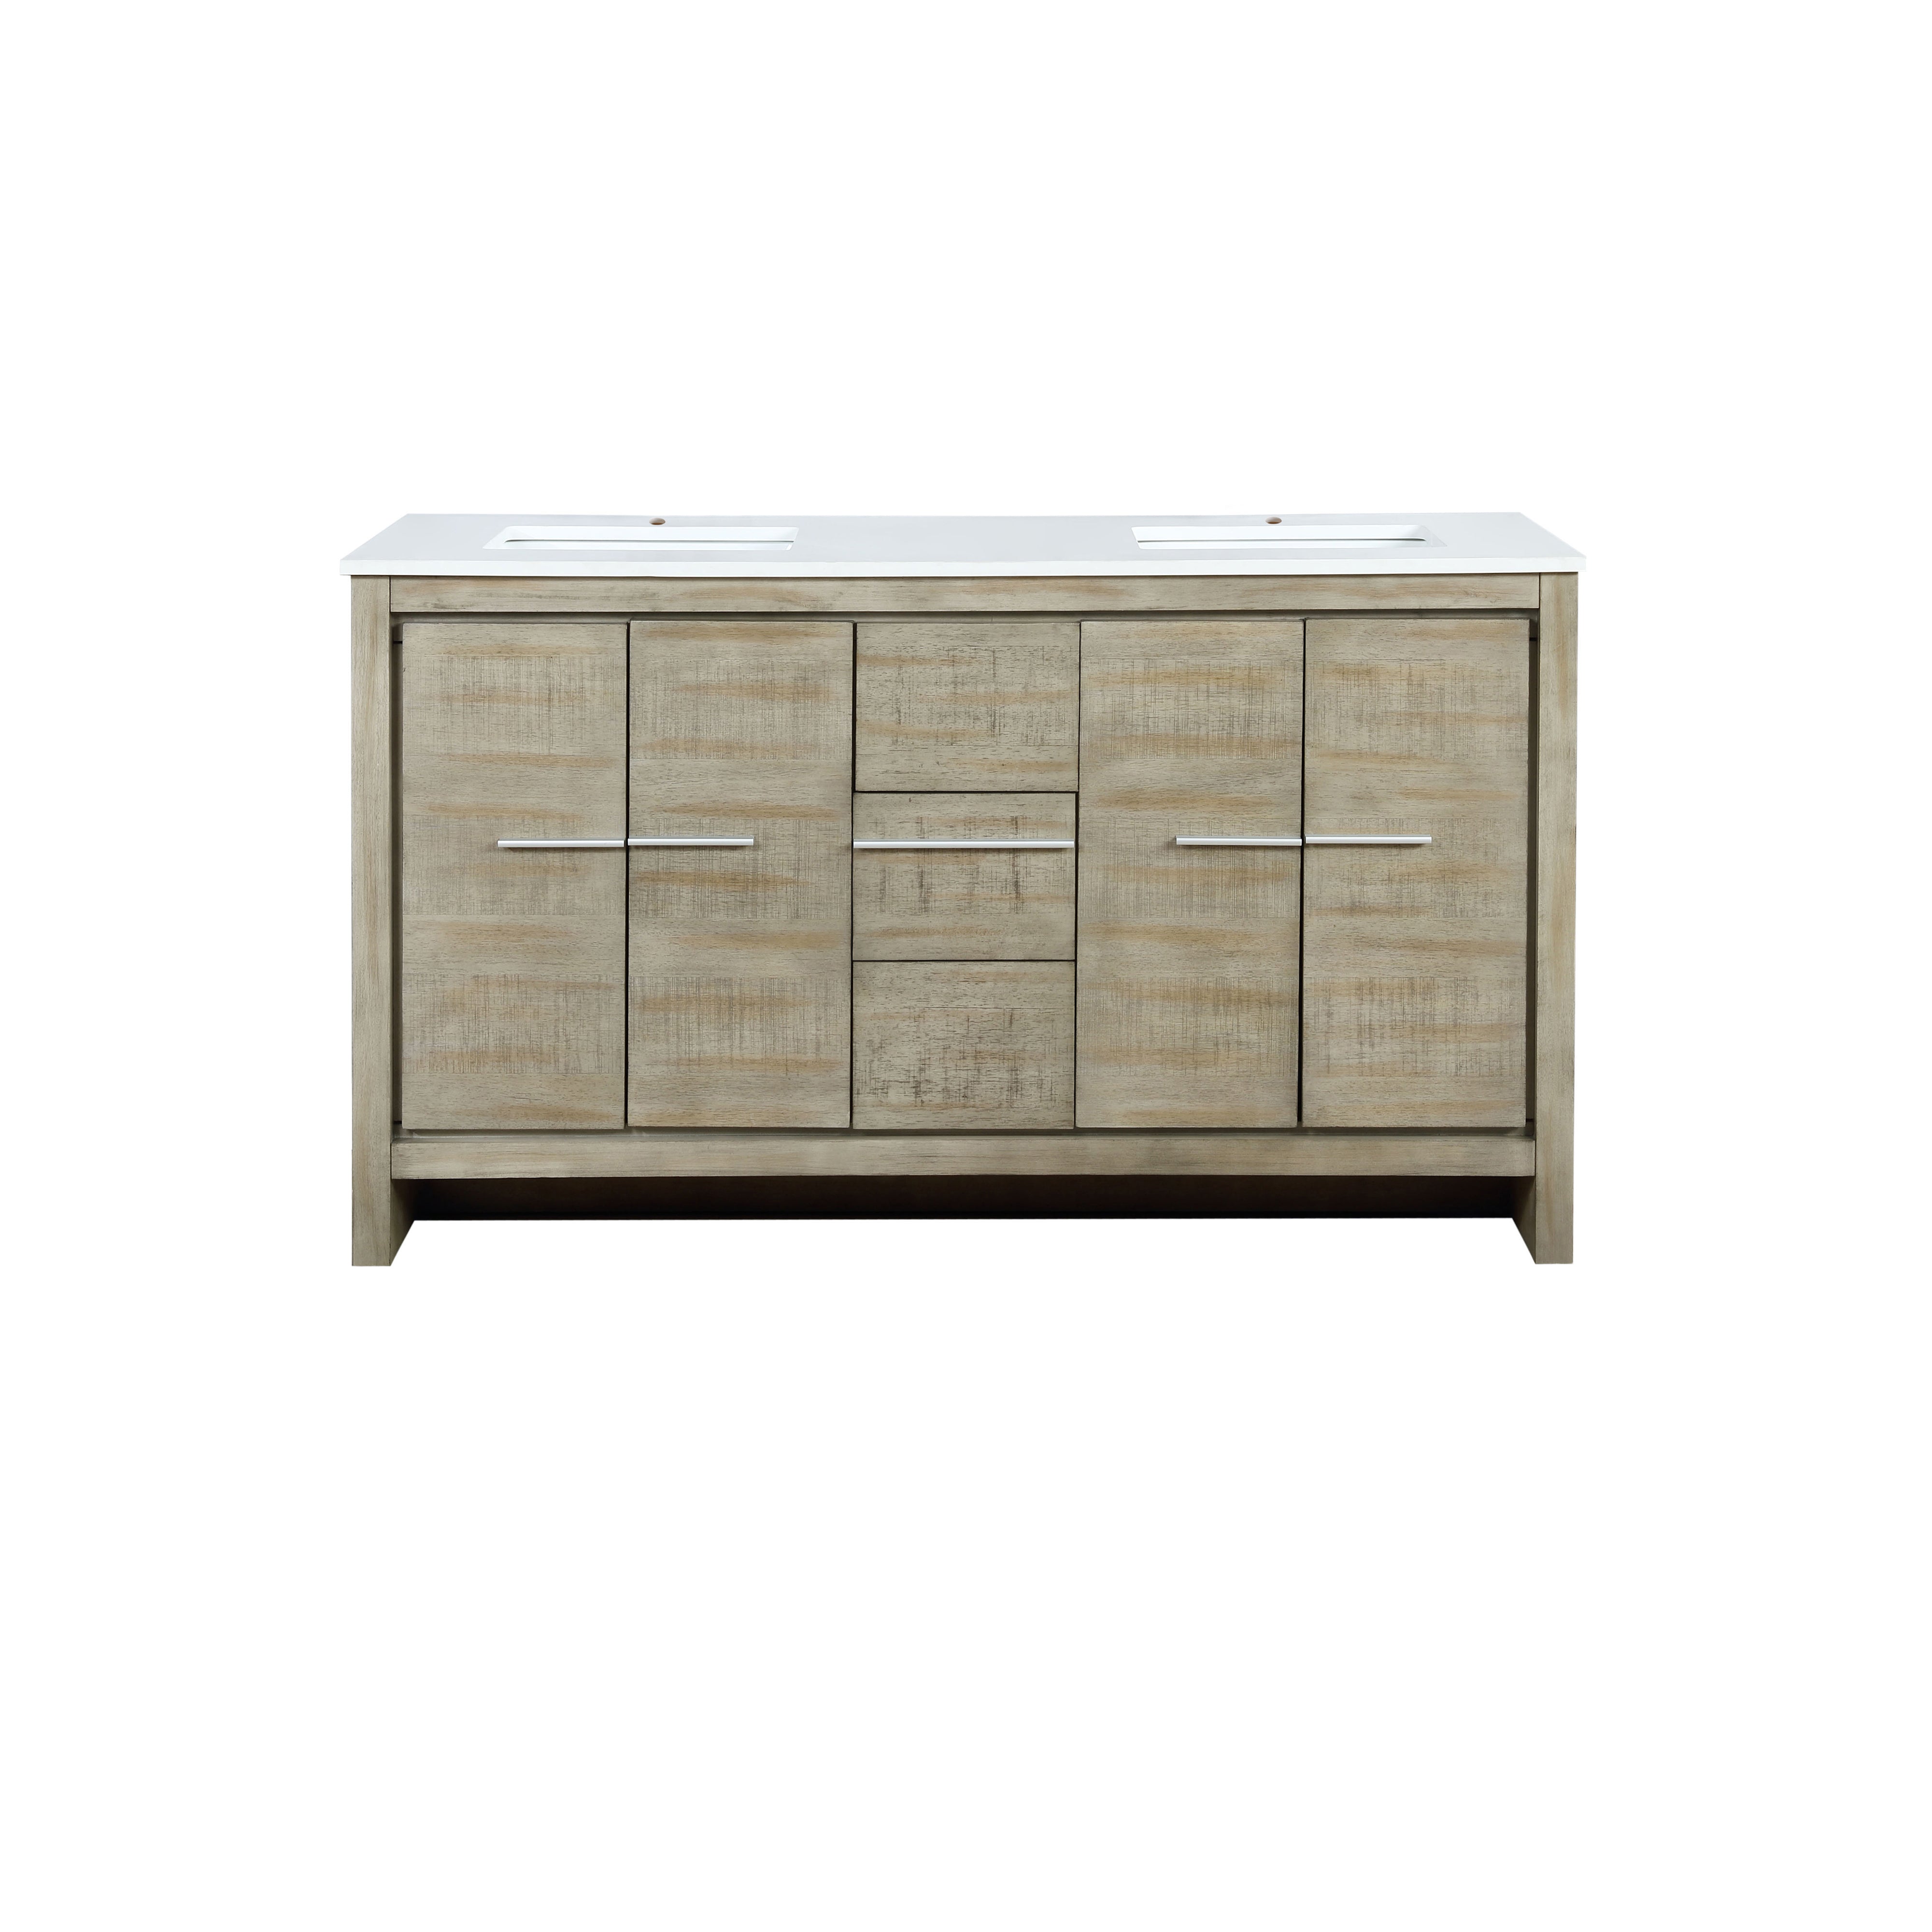 Lexora Lafarre LLF60SKSOS000 60" Double Bathroom Vanity in Rustic Acacia with White Quartz, White Rectangle Sinks, Front View